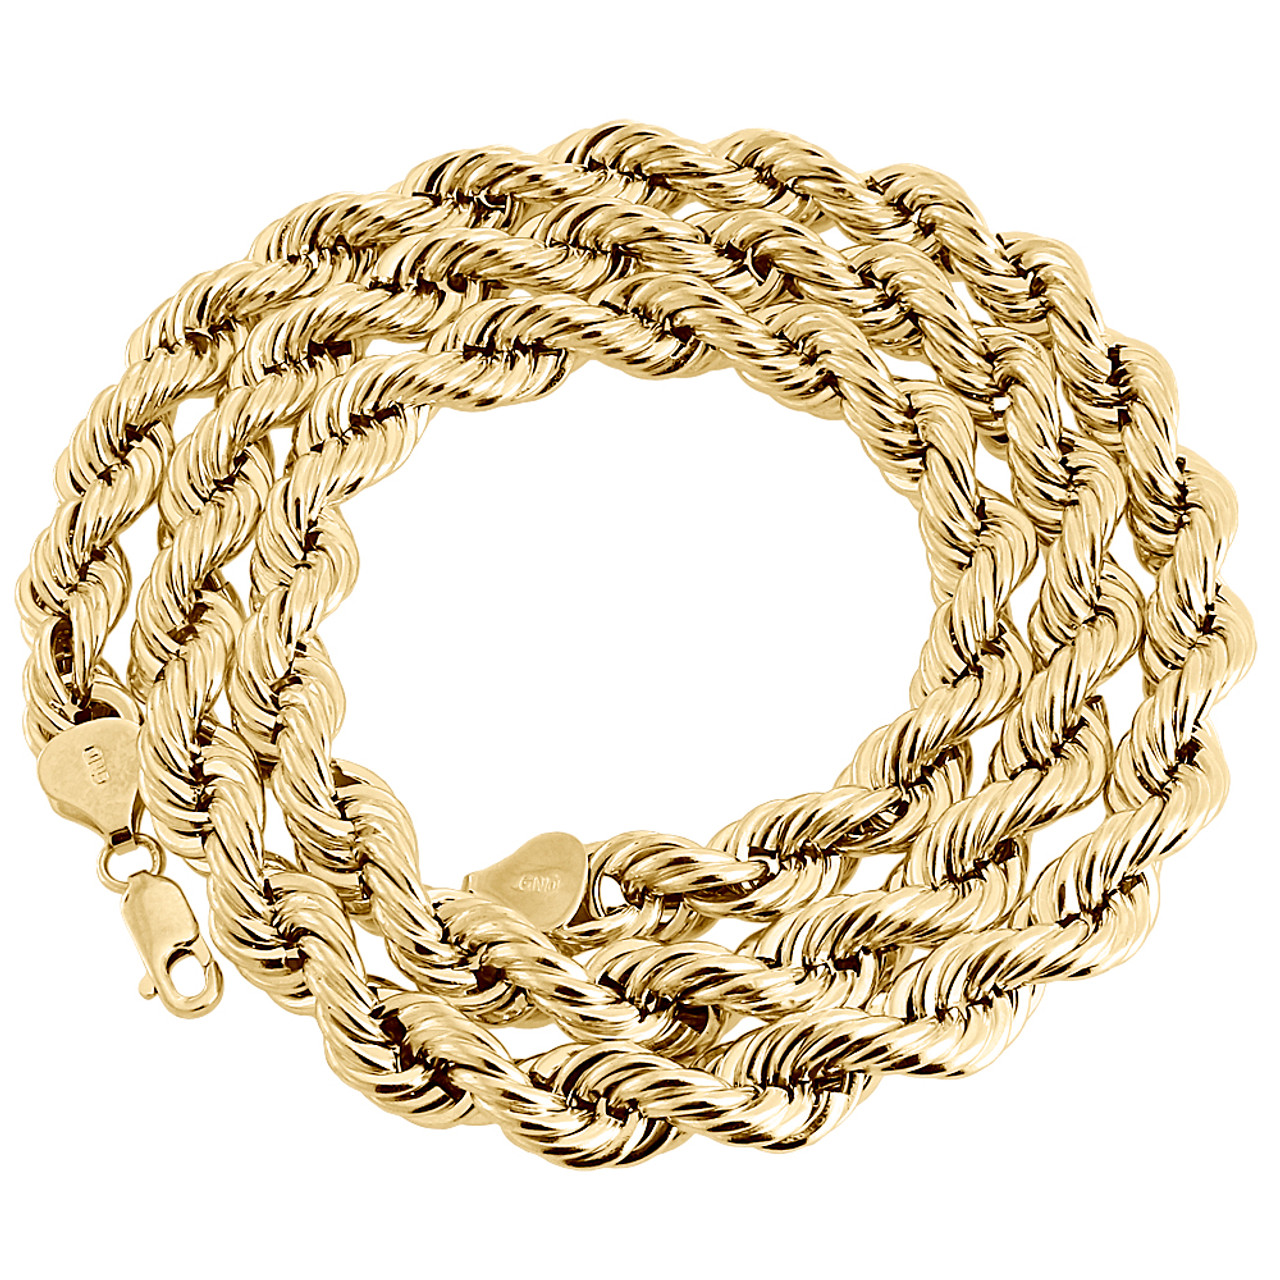 10K Yellow Gold Solid Rope Chain 7mm 22 Inches - 116.27 Grams - Nyc Luxury